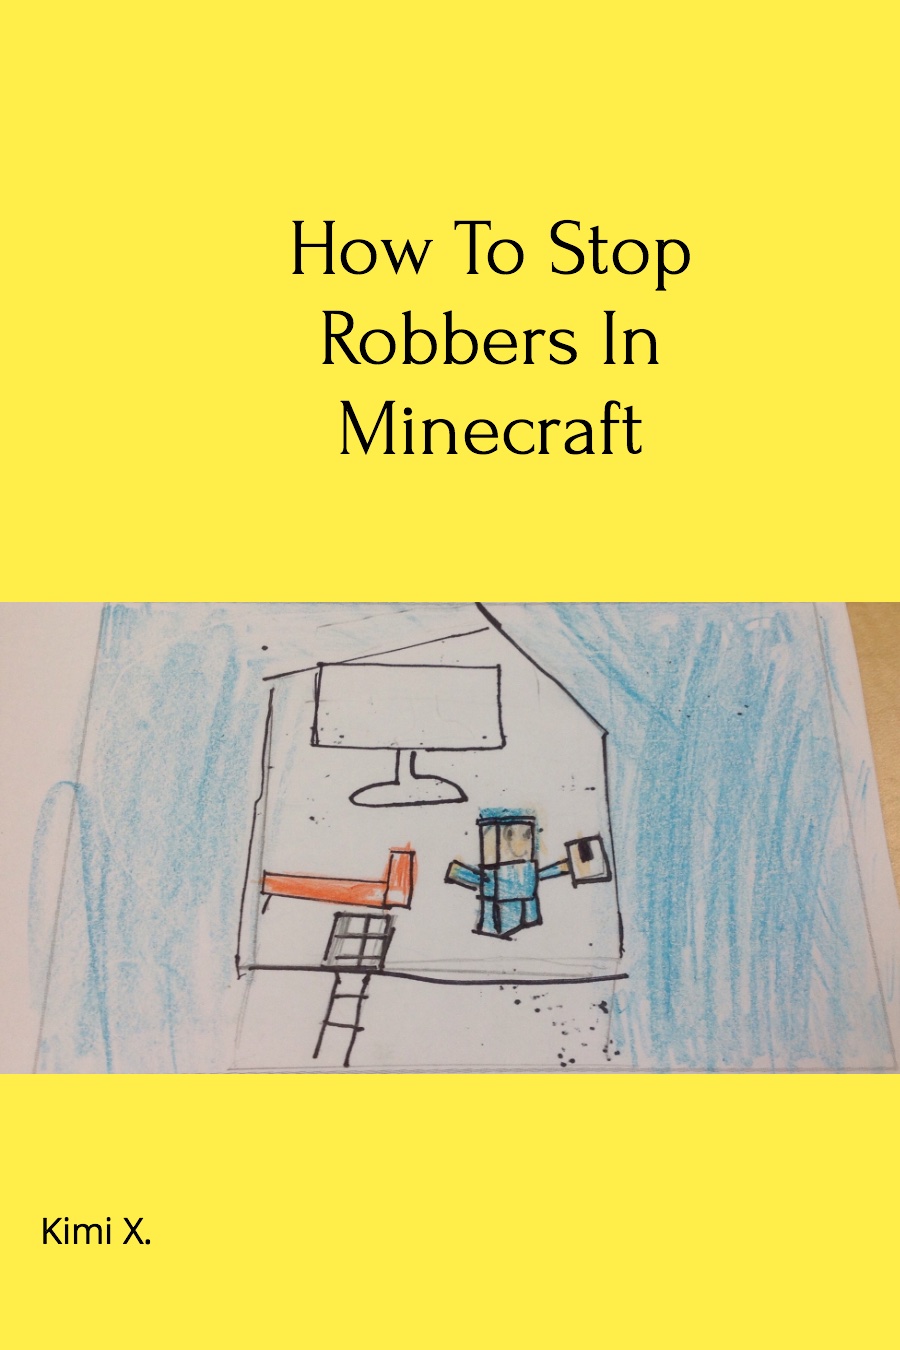 How to Stop Robbers in Minecrat by Kimi X